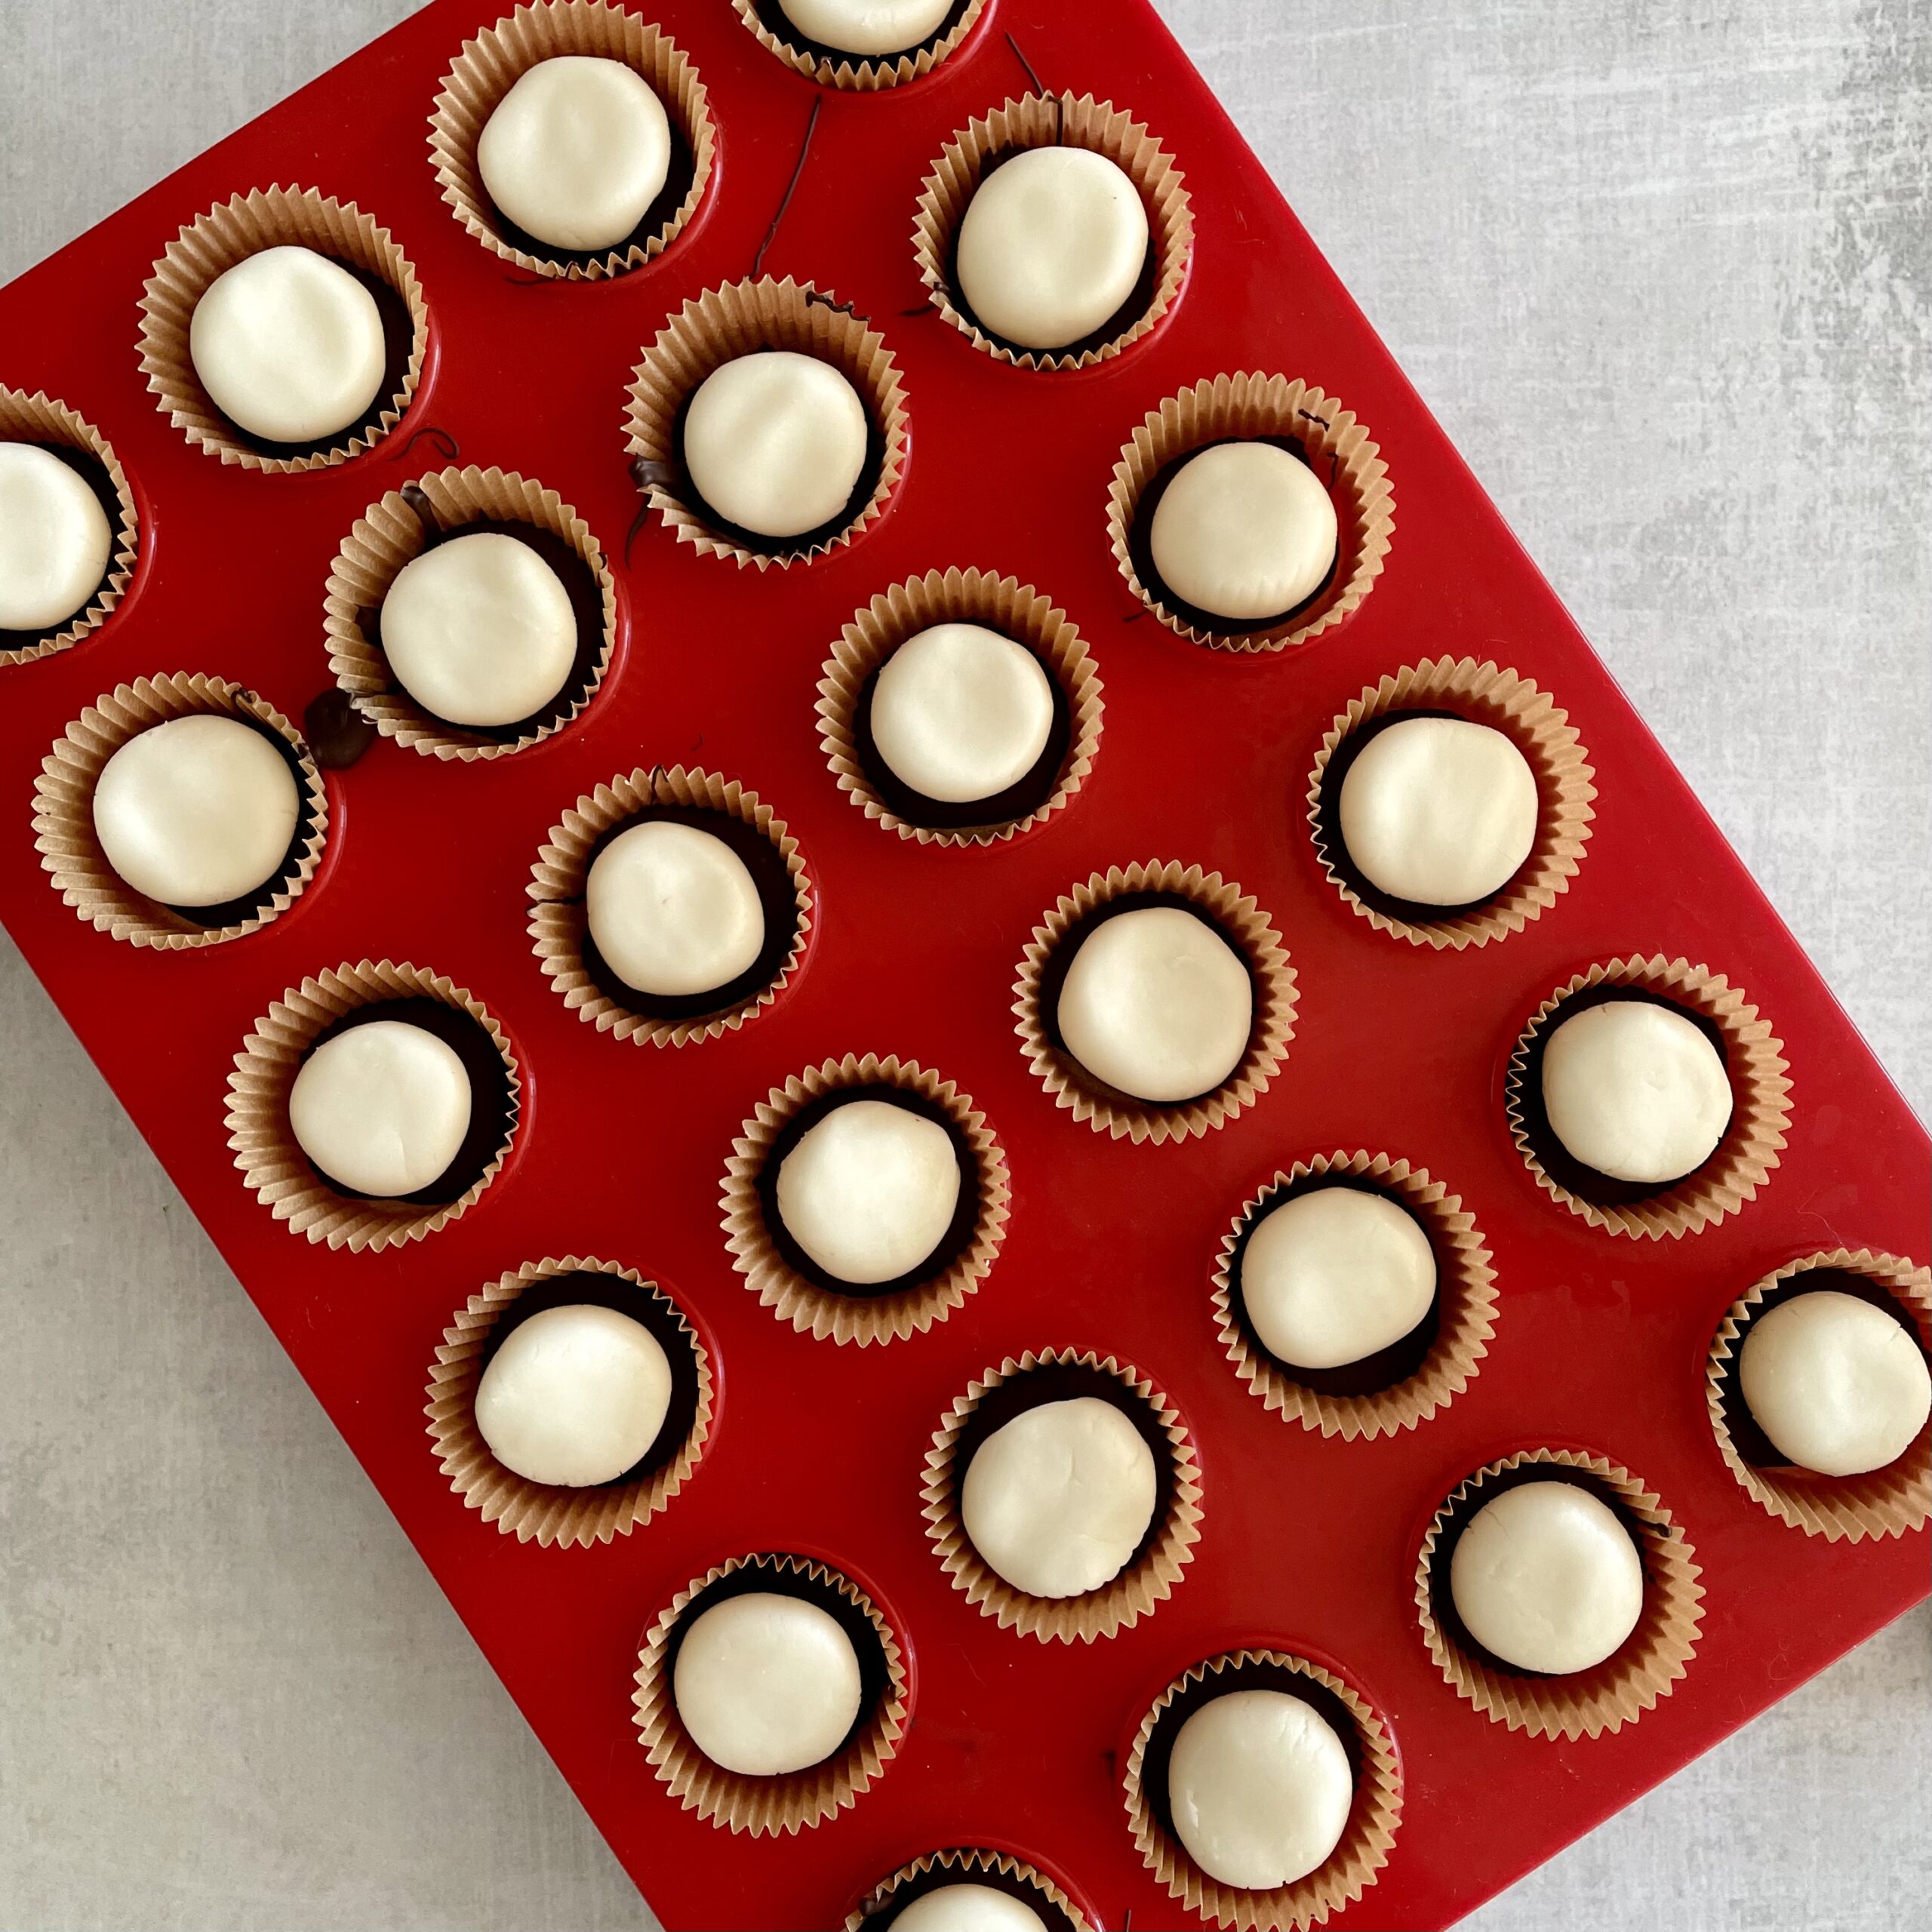 red muffin tray filling with white cream candies